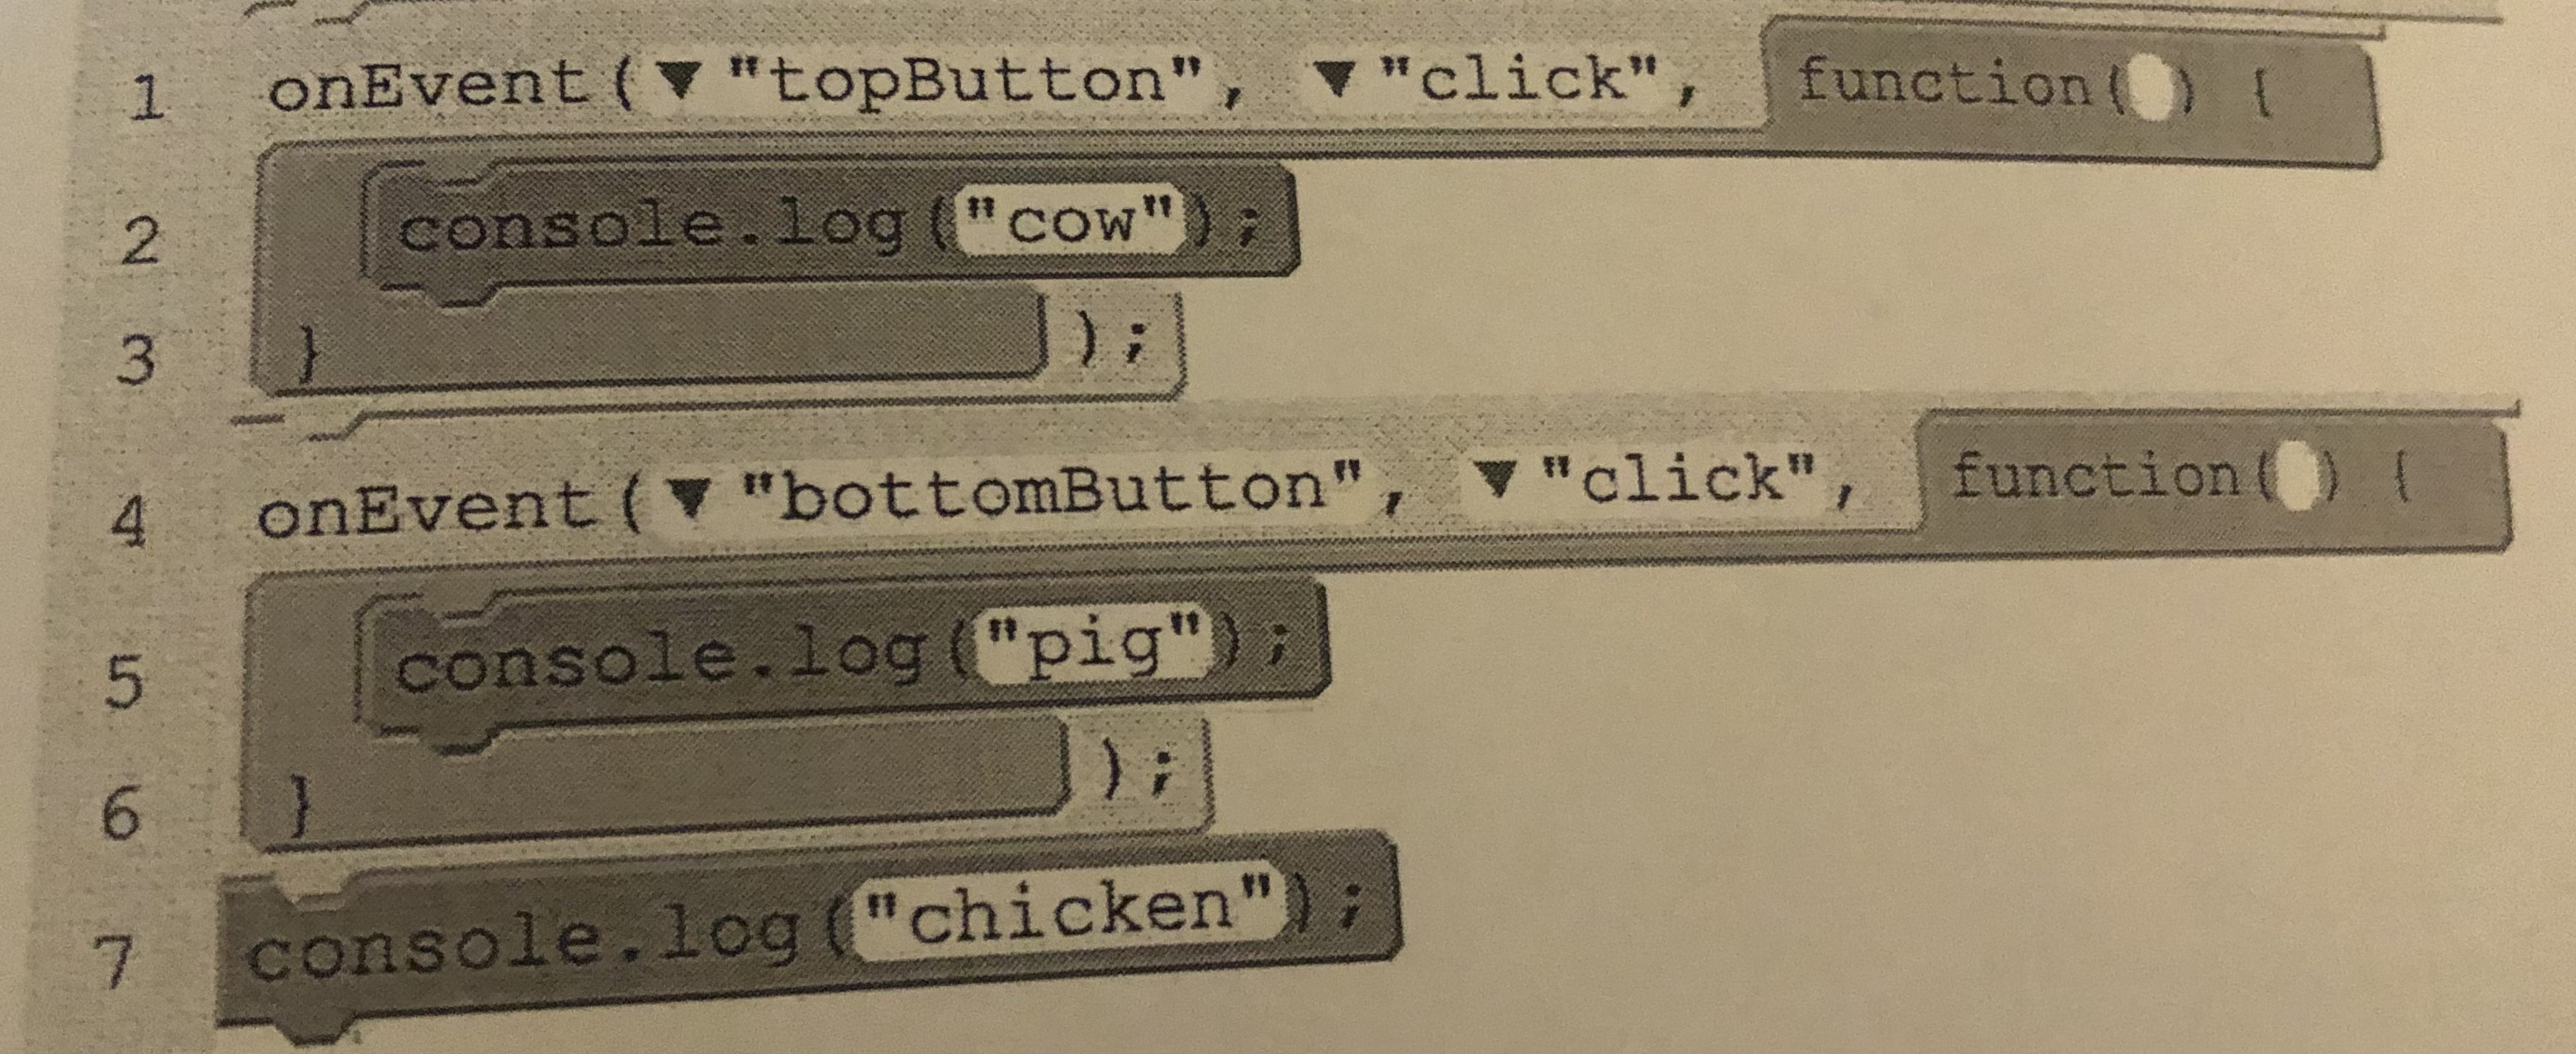 <p>The following program is run. Then the user clicks the “bottomButton” once ad then clicks the “topButton” once. What will be displayed in the console?</p><p>A.) cow pig chicken</p><p>B.) cow chicken pig</p><p>C.) pig cow chicken</p><p>D.) chicken pig cow</p>